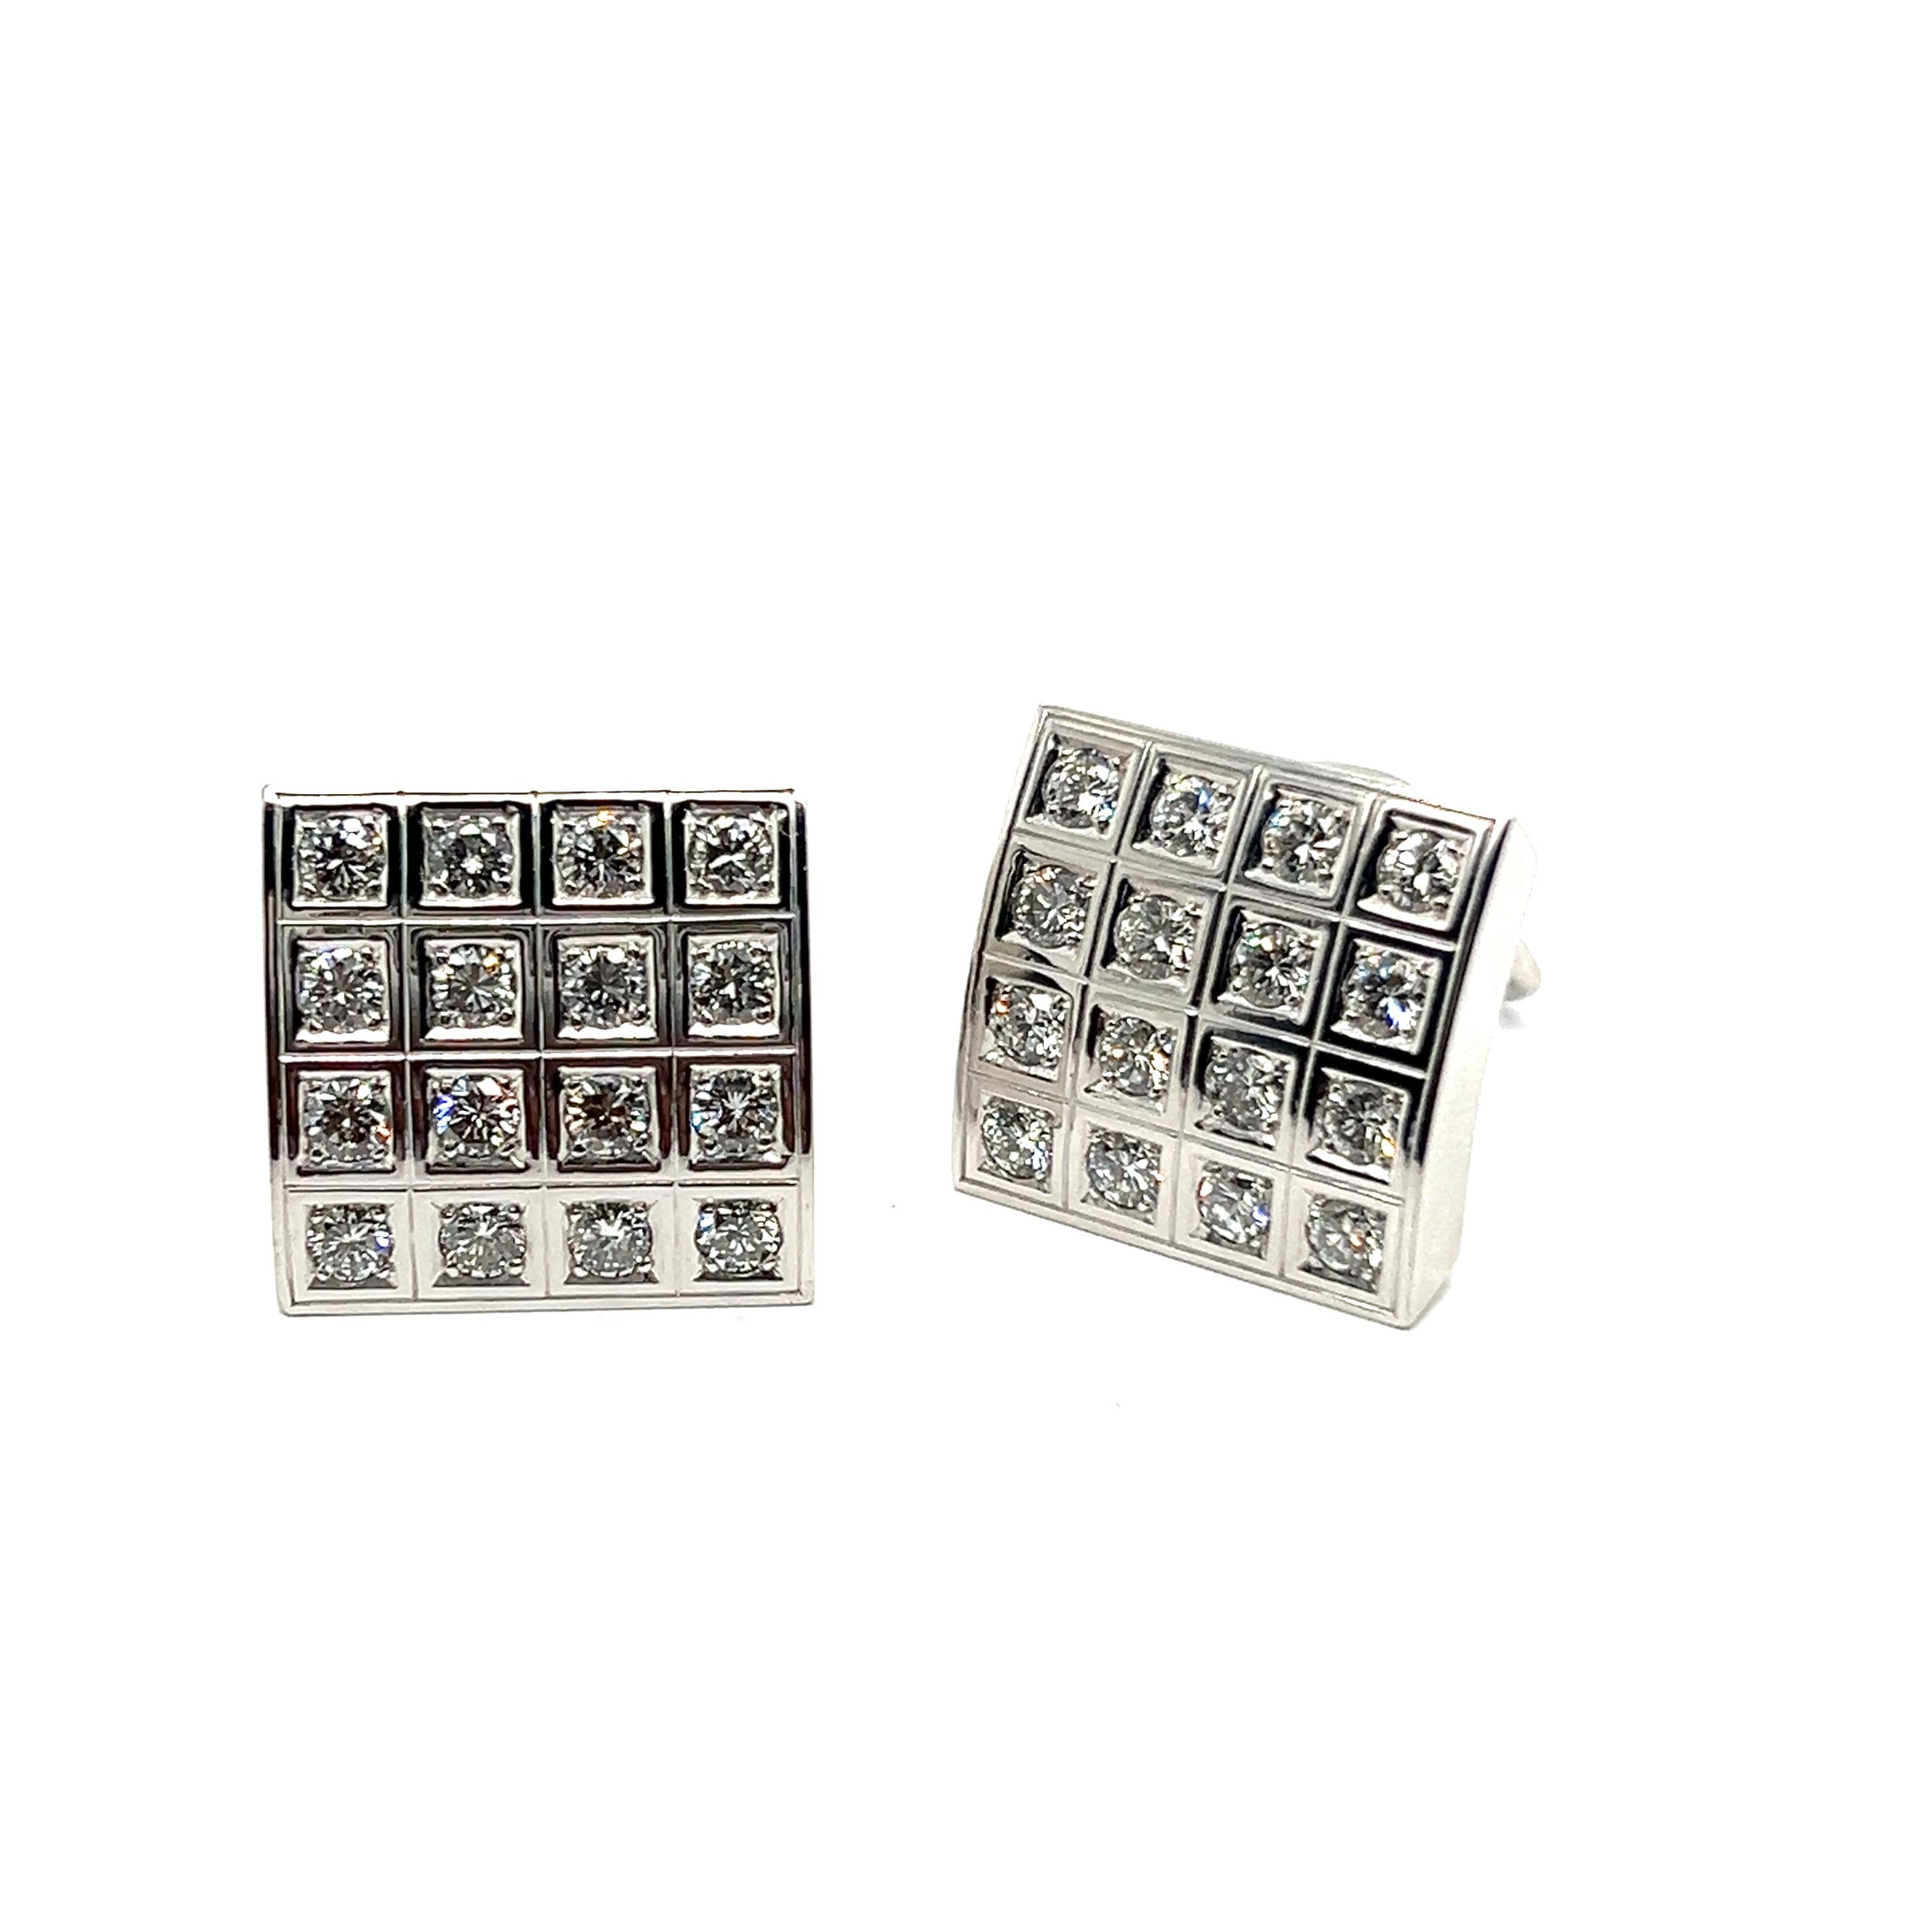 Brilliant Cut  Bold Graphic Earrings with Diamonds in 18 Karat White Gold by Majo Fruithof